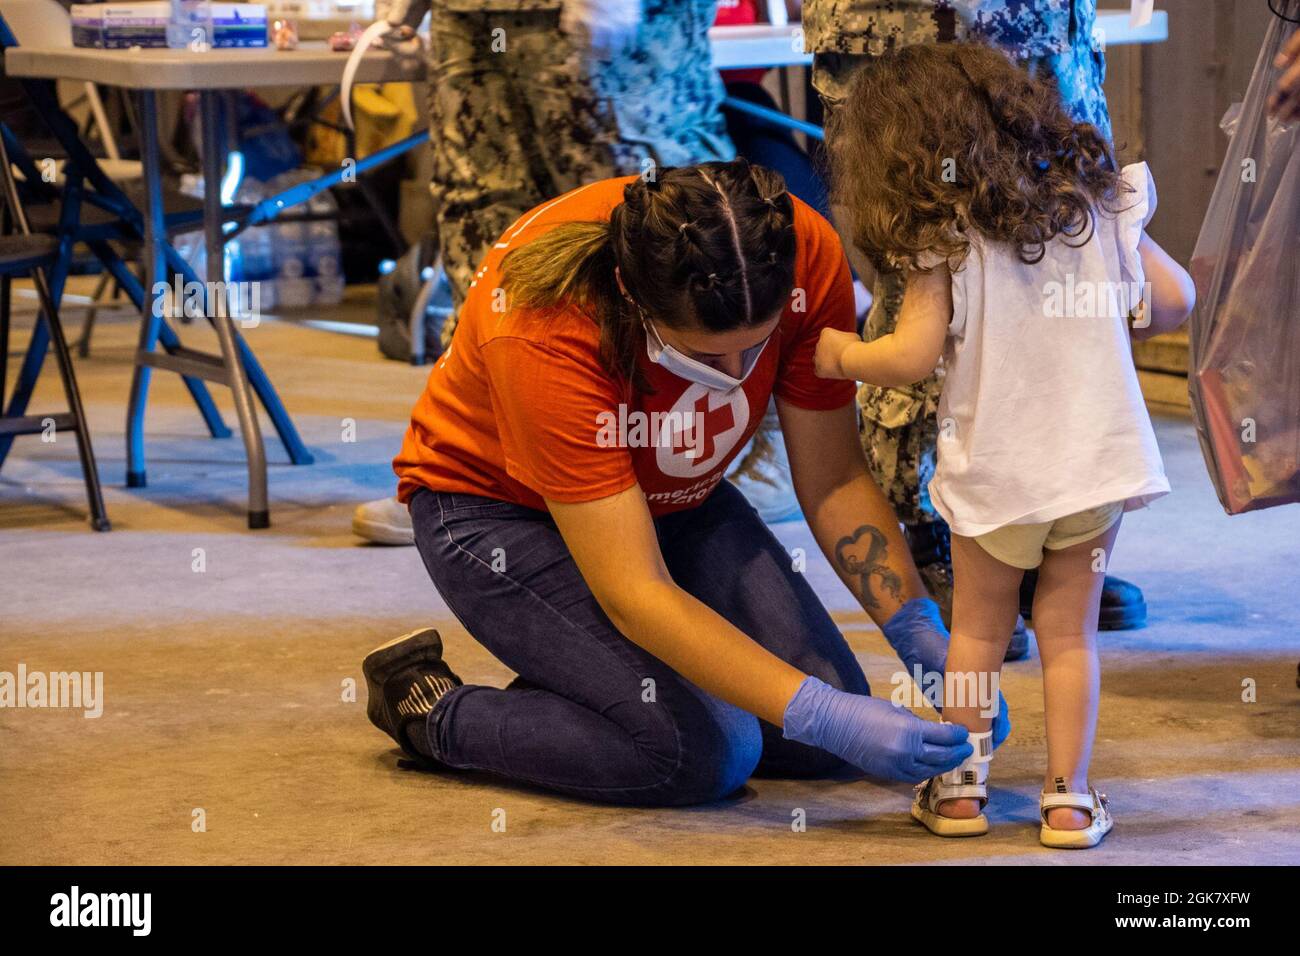 NAVAL STATION ROTA, Spain (Aug. 31, 2021) An American Red Cross volunteer attaches an identification leg band to the ankle of a child evacuated from Afghanistan after her arrival at Naval Station (NAVSTA) Rota Aug. 31, 2021. NAVSTA Rota is currently supporting the Department of State mission to facilitate the safe departure and relocation of U.S. citizens, Special Immigration Visa recipients, and vulnerable populations from Afghanistan. Stock Photo